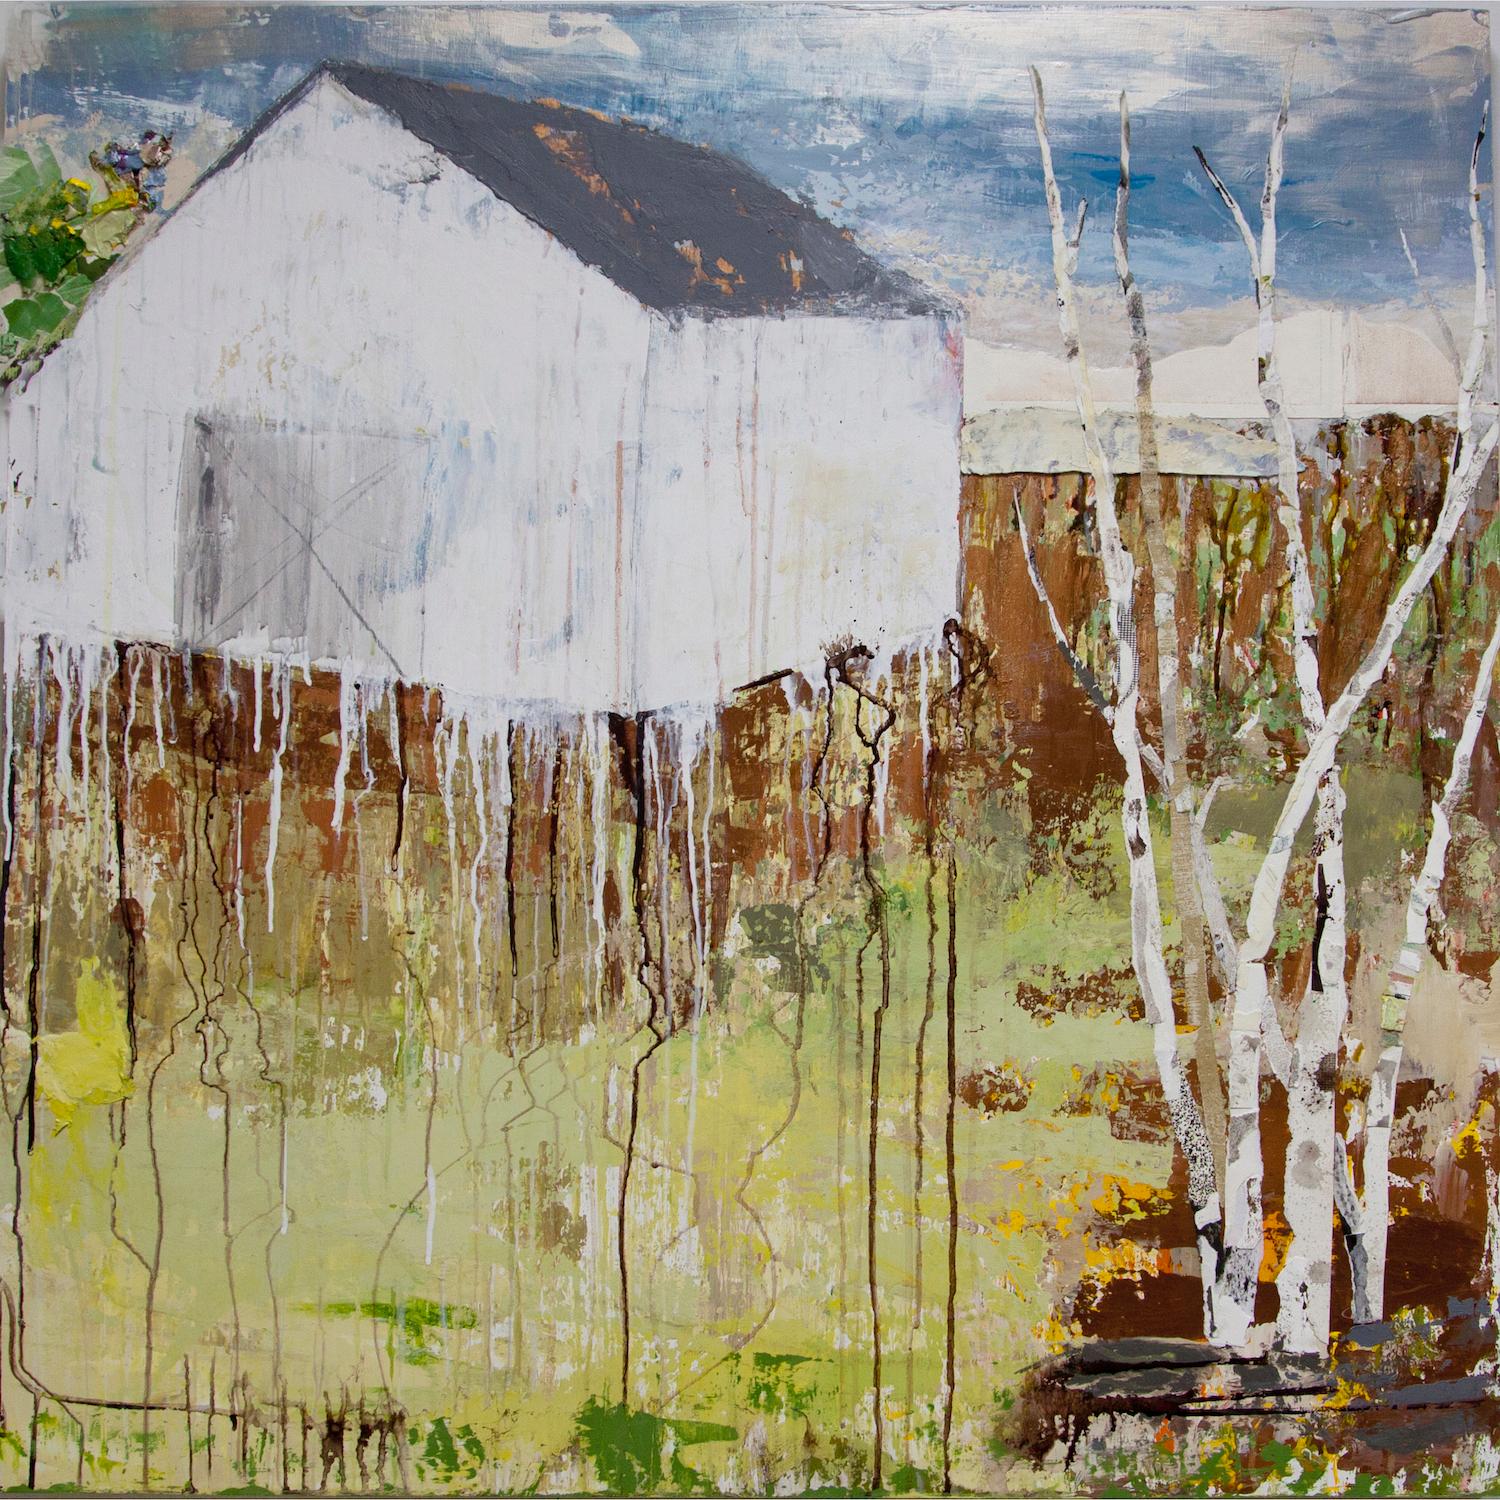 Brenda Cirioni’s mixed media painting “White Hill” is from “Barn Series” and depicts a white barn and birch trees in a contemporary landscape. “White Hill” is 36 x 36 x 1.75 on birch panel. The earth tone palette consists of copper, green, white,